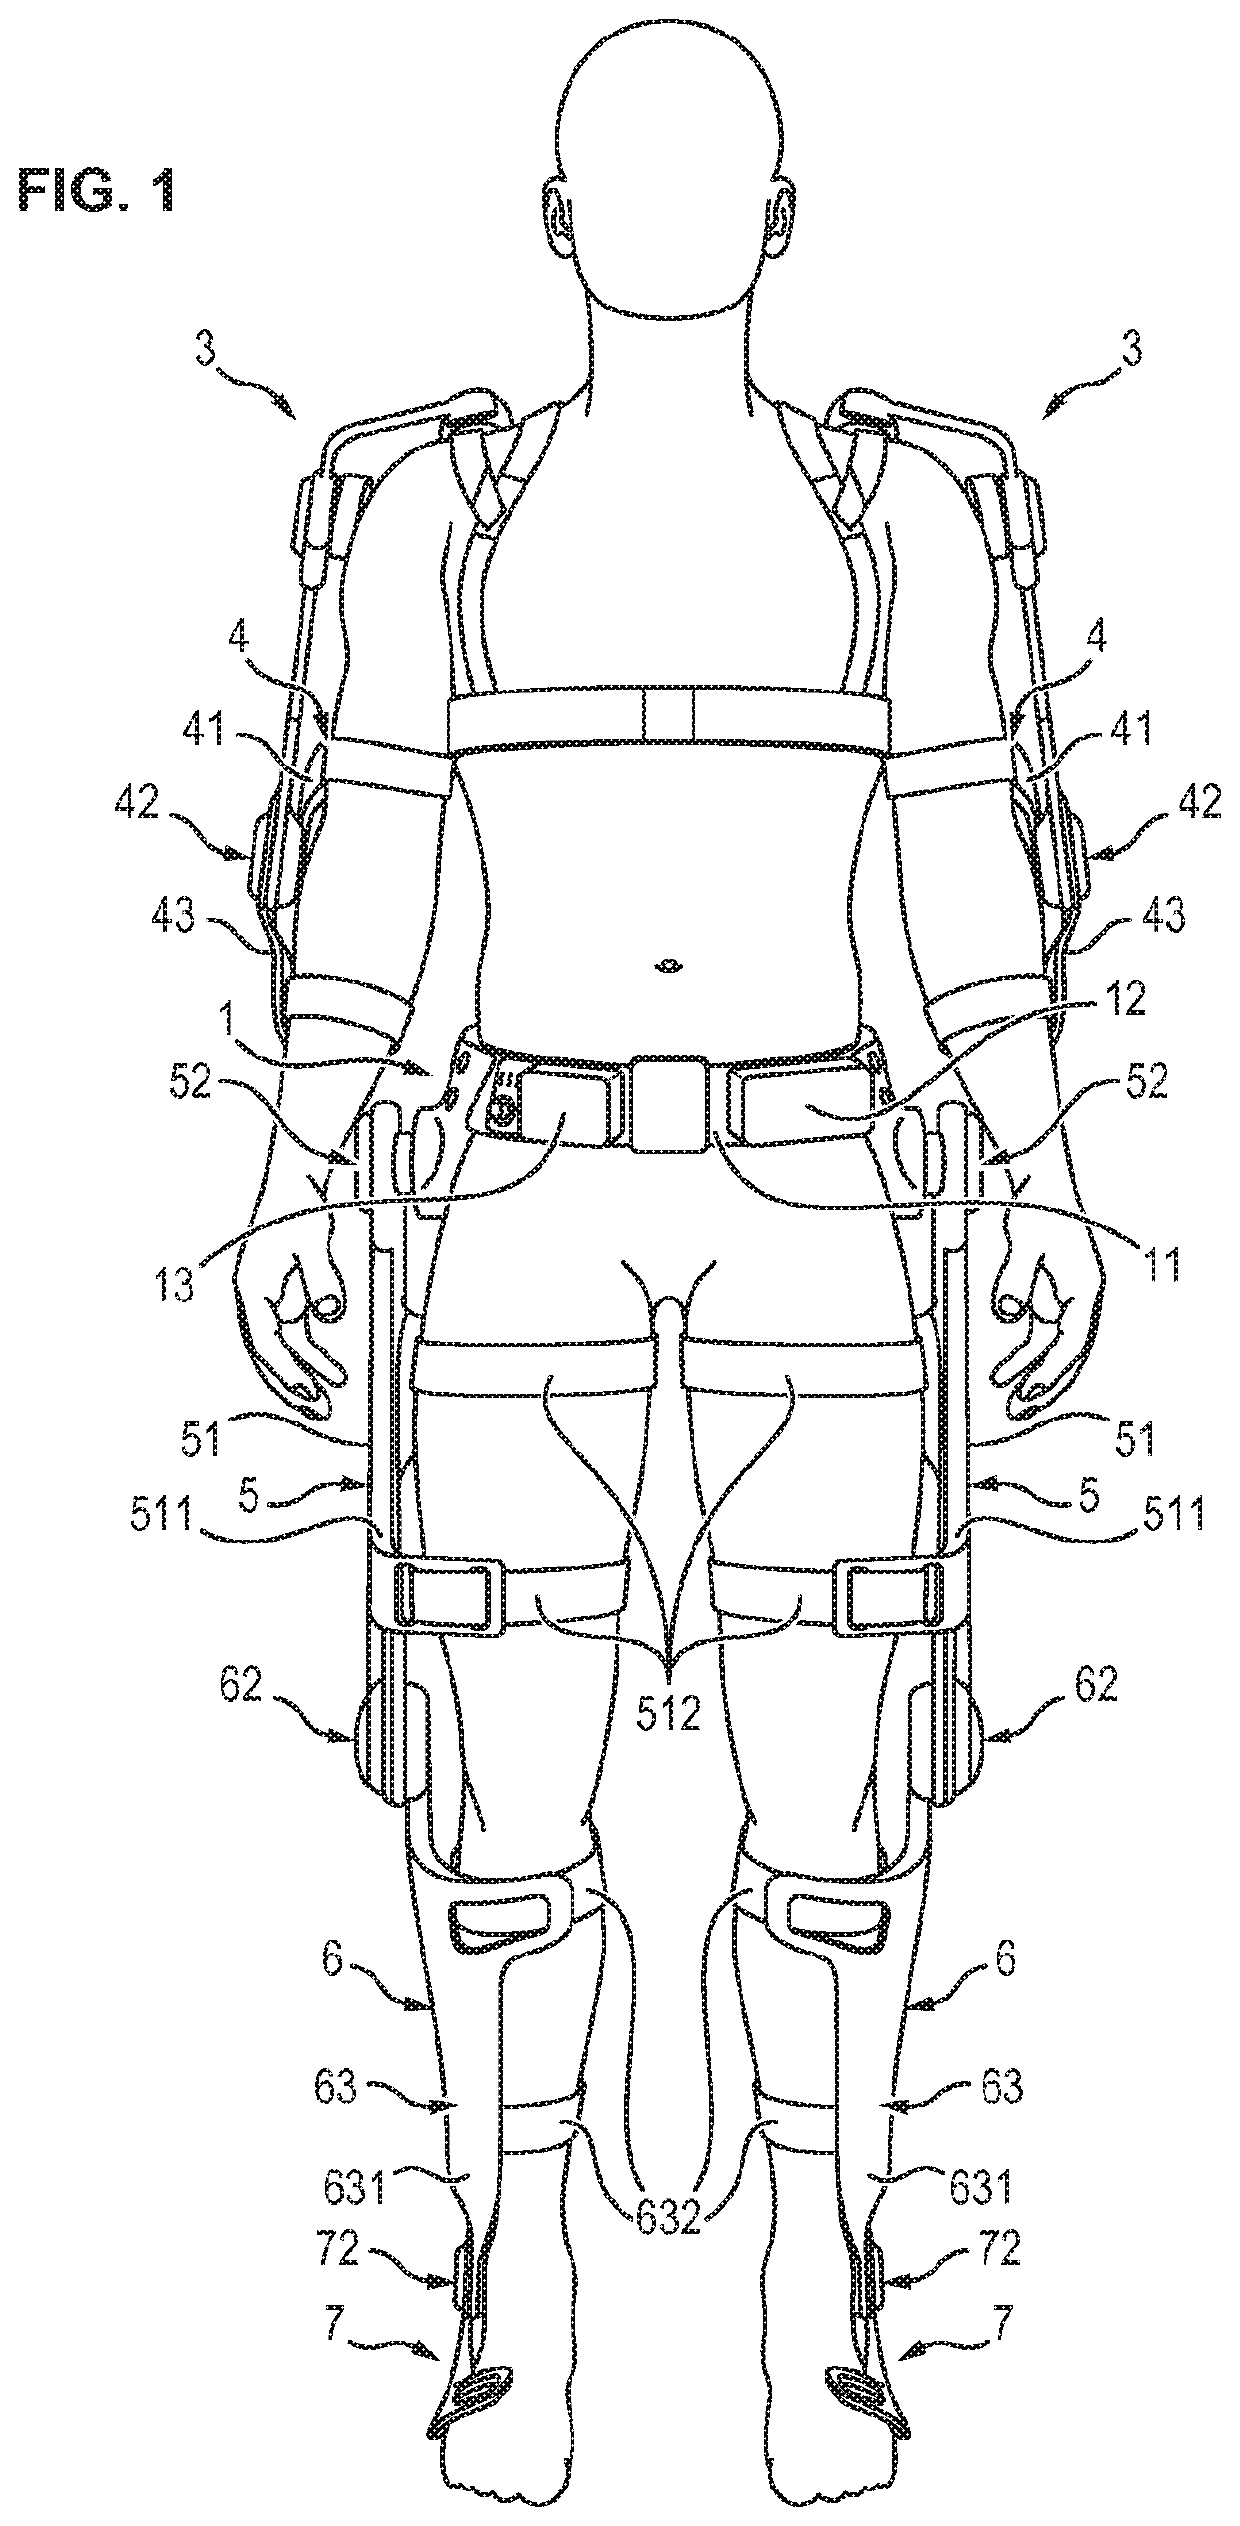 Exoskeleton structure that provides force assistance to the user